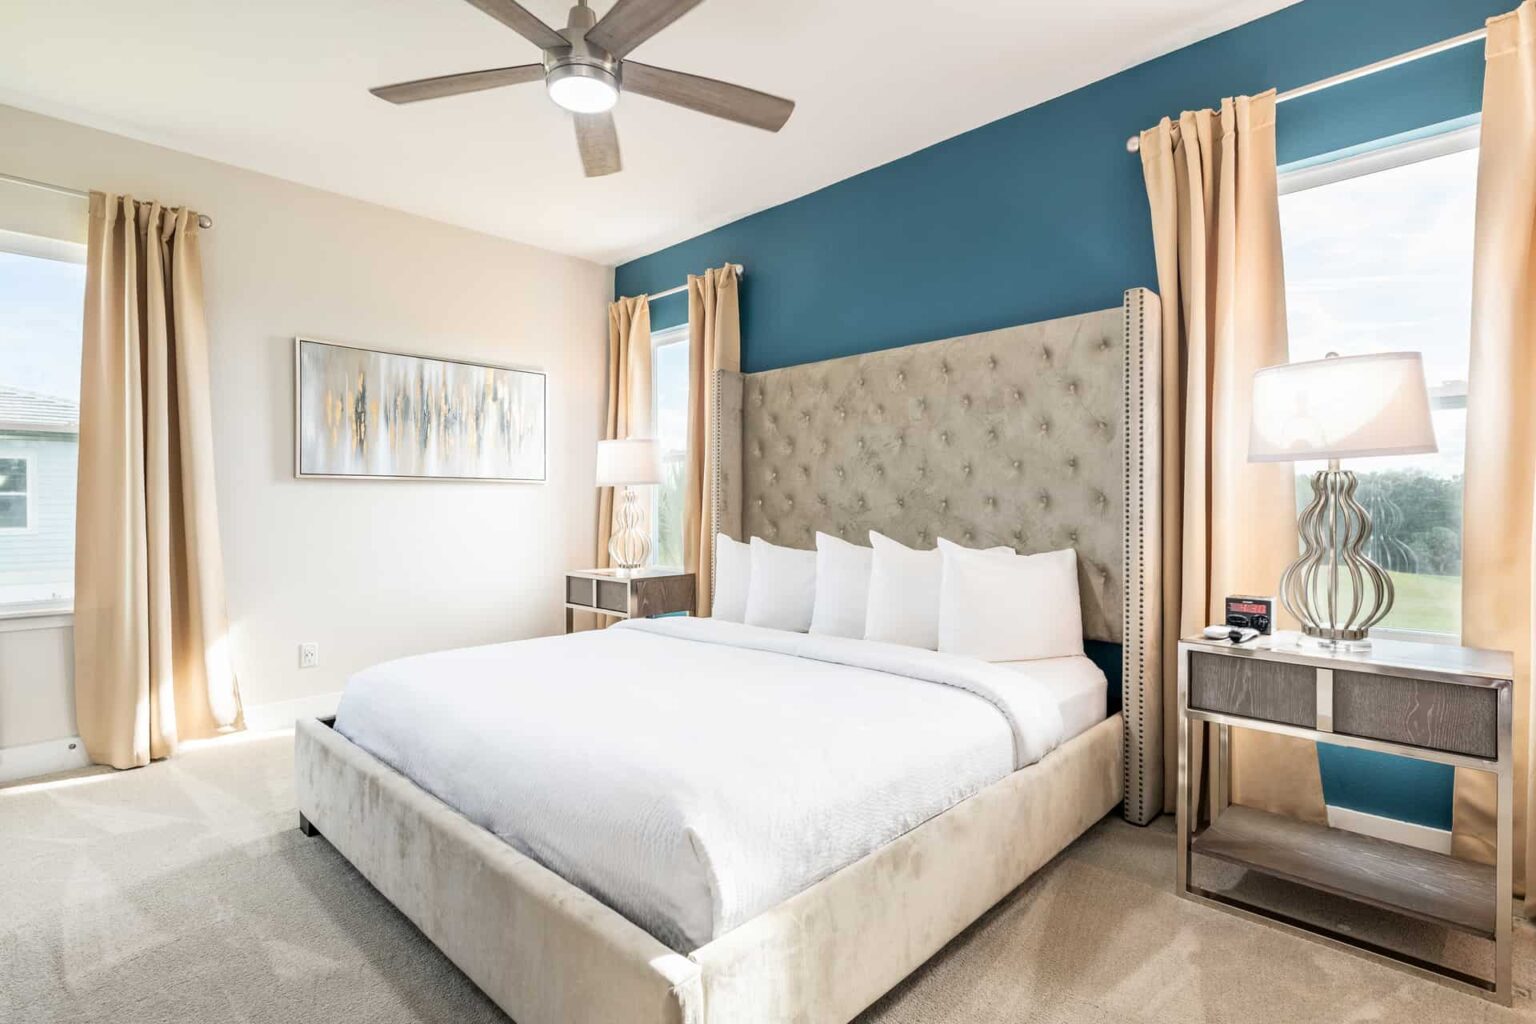 Spacious master bedroom with large king bed at Eagle Trace Resort Orlando.